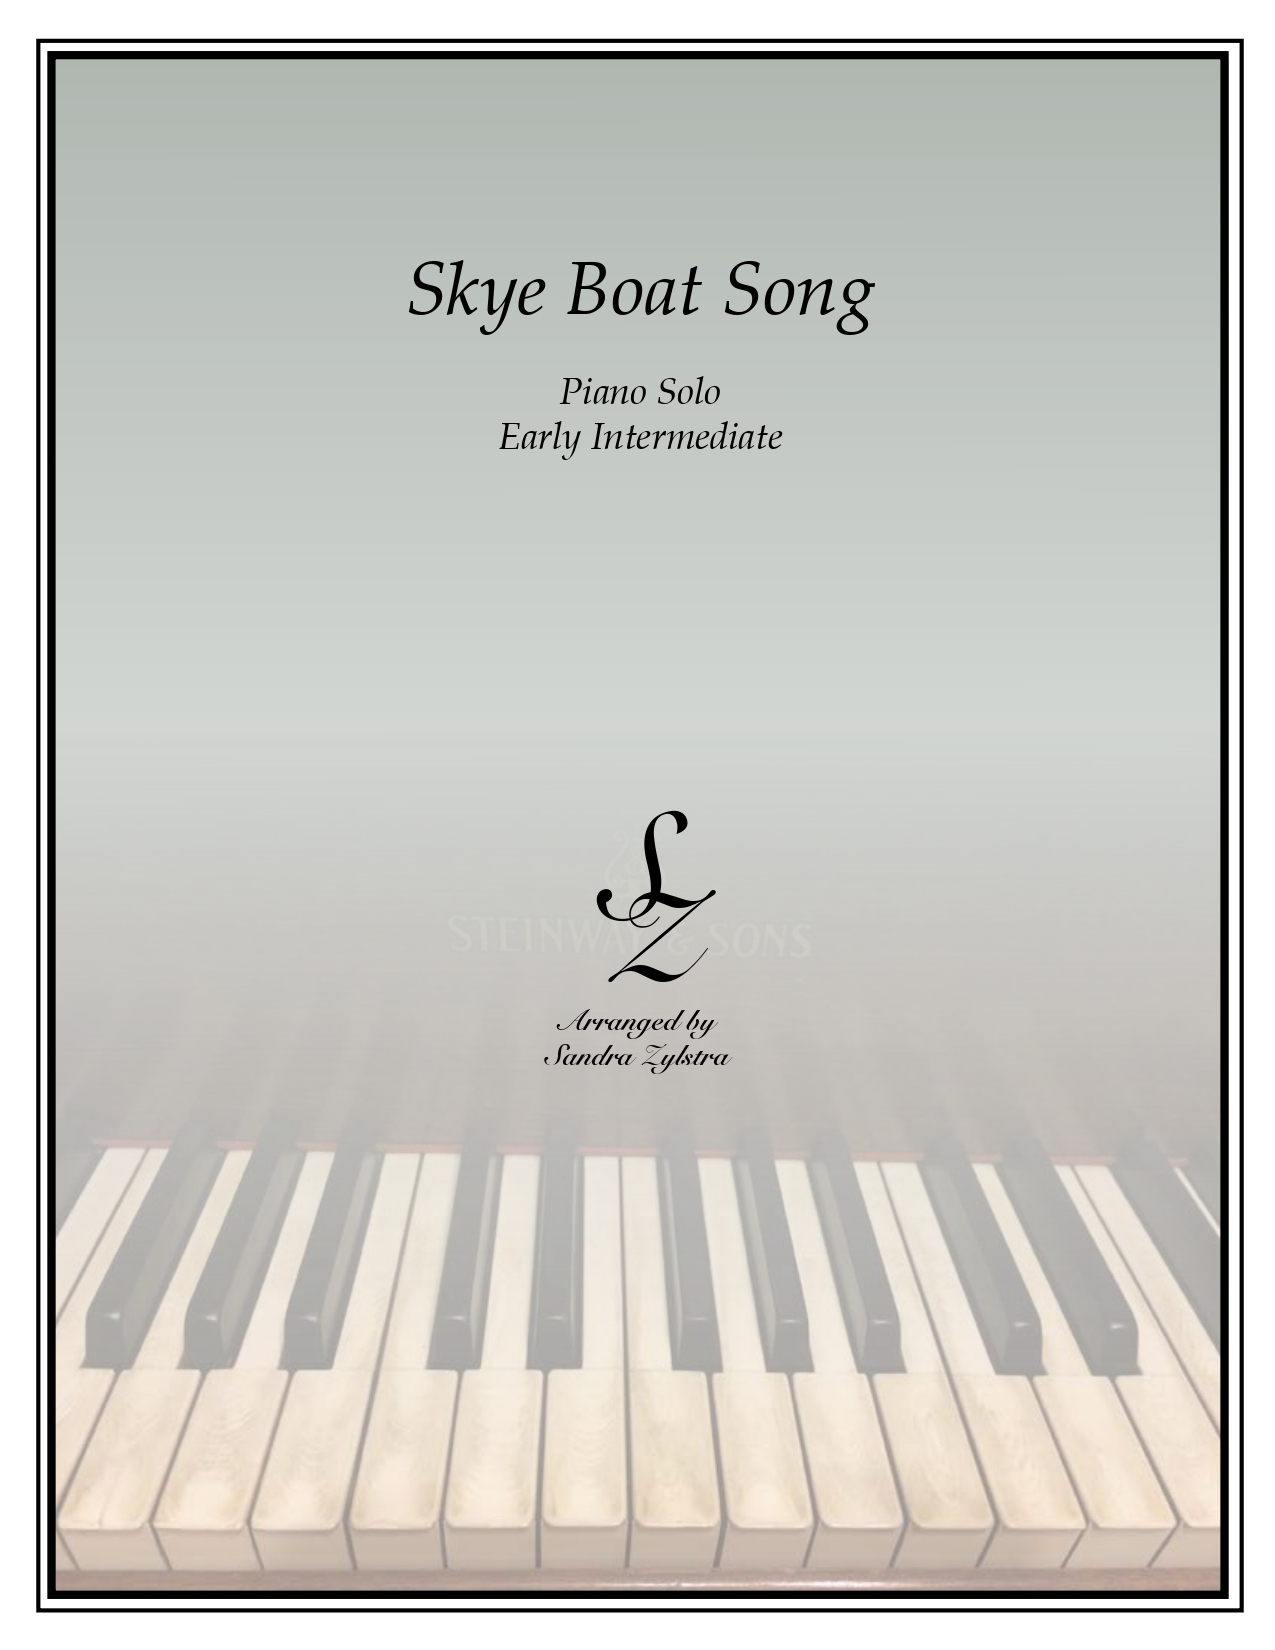 Skye Boat Song early intermediate piano cover page 00011